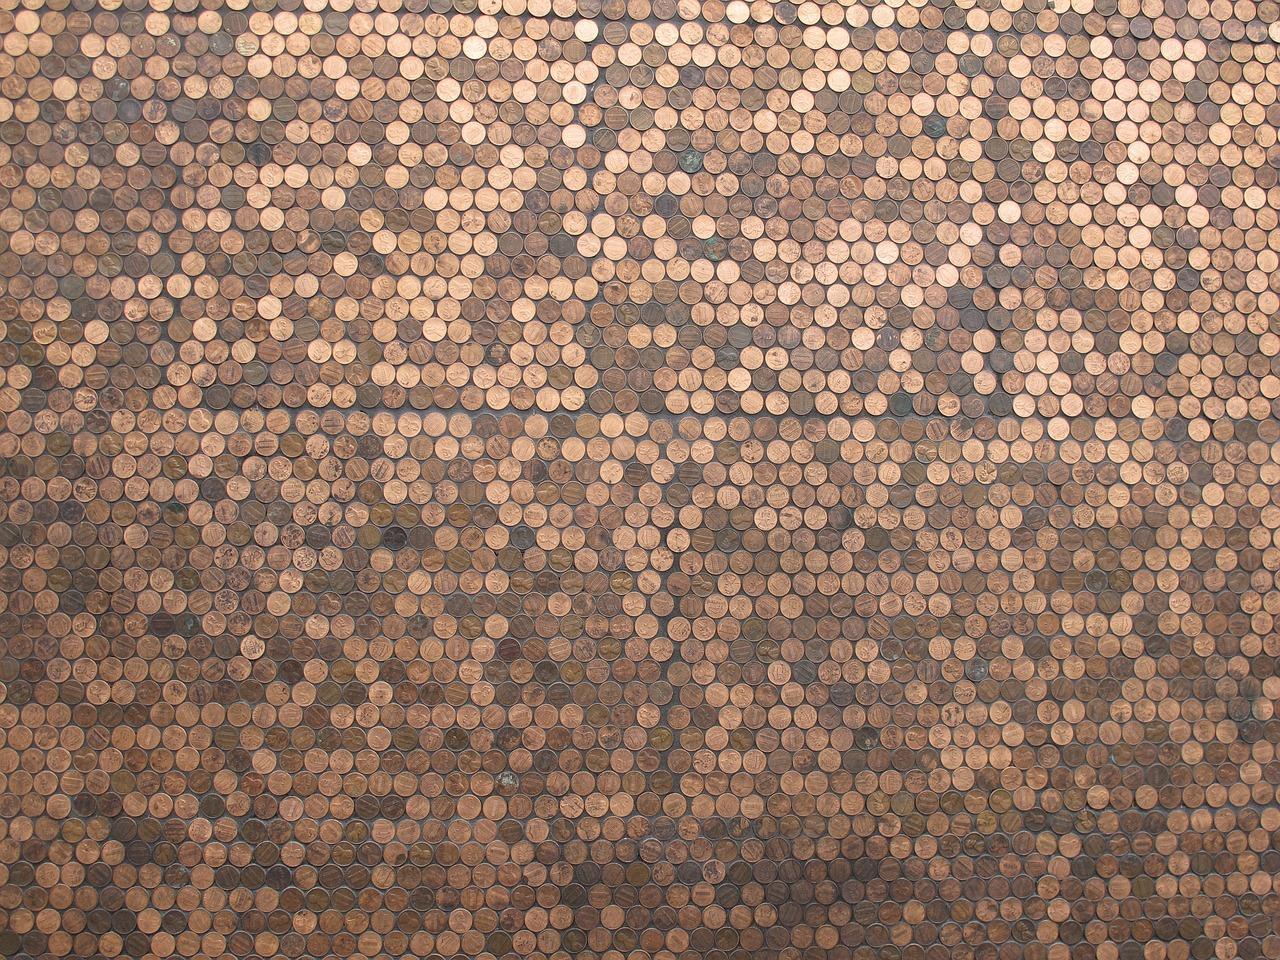 What does a million dollars look like in pennies? 